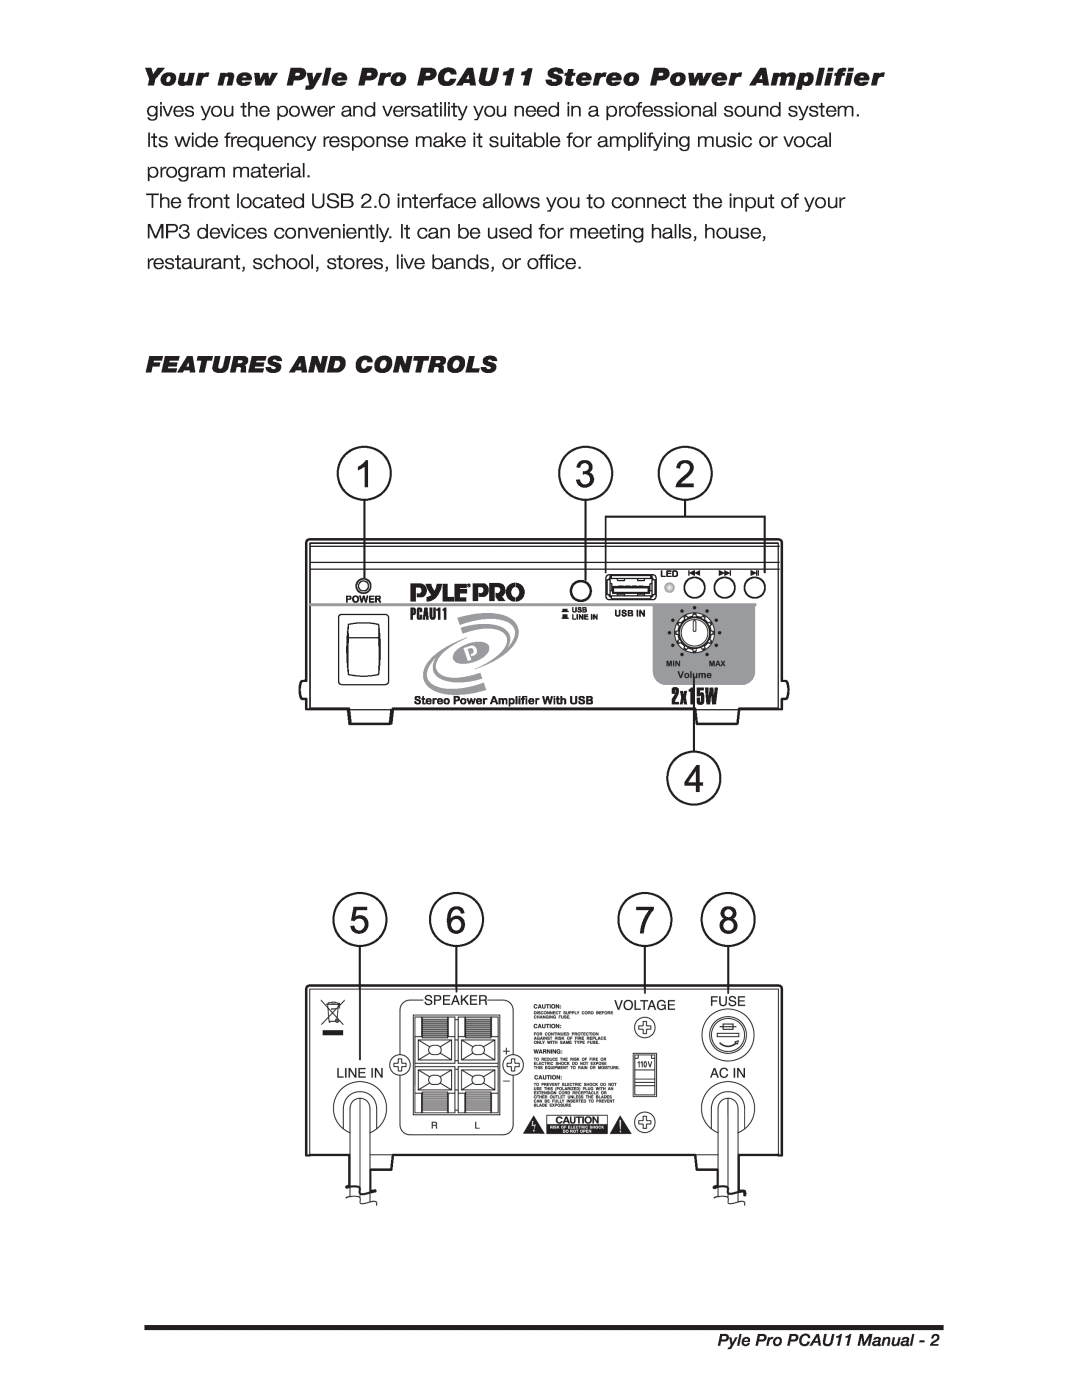 PYLE Audio manual Features And Controls, Your new Pyle Pro PCAU11 Stereo Power Amplifier 